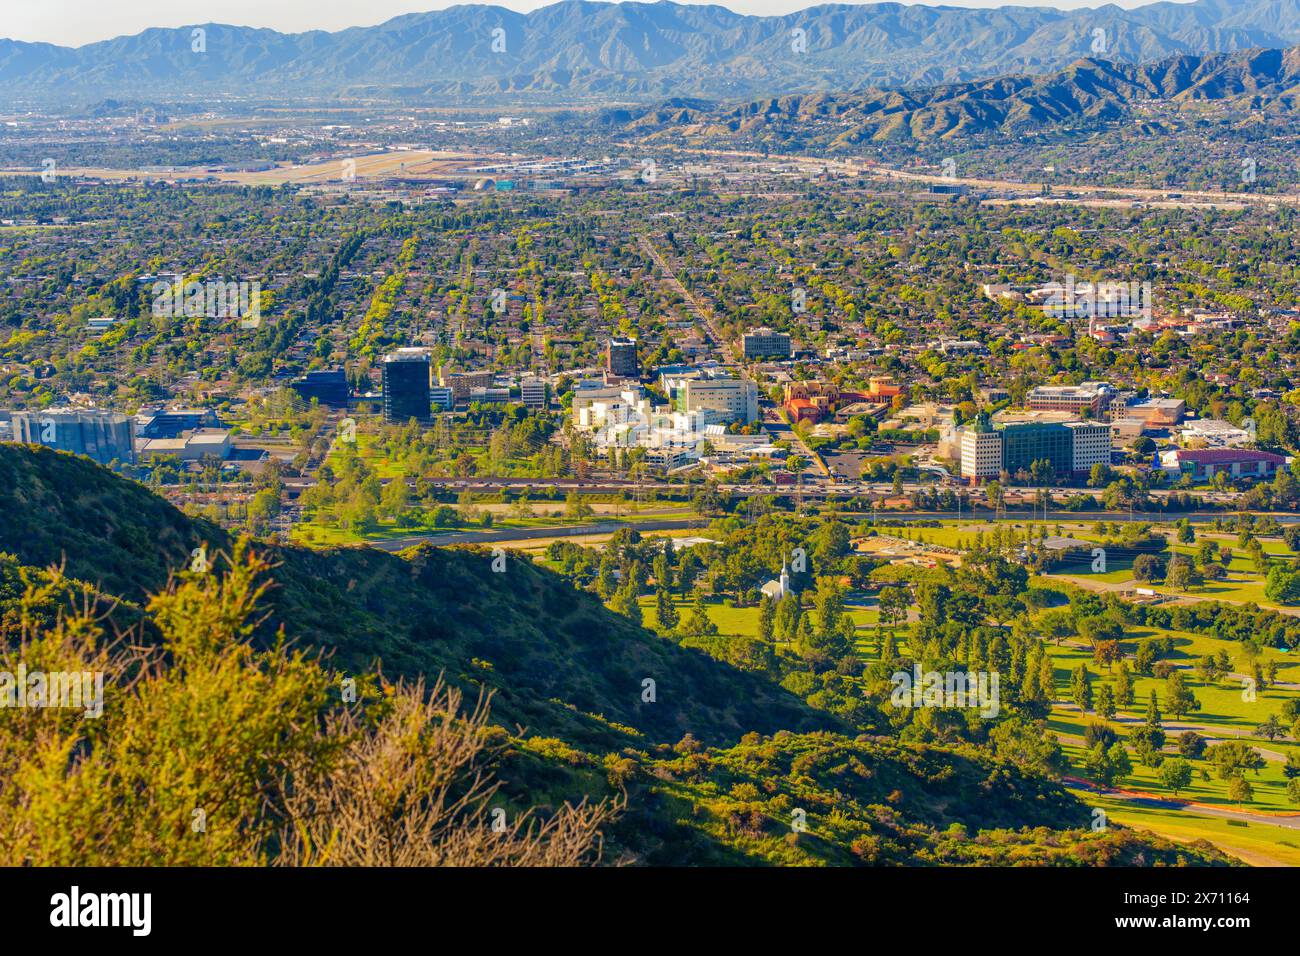 Glimpse of Los Angeles cityscape from a hillside along the road to the iconic Hollywood sign. Stock Photo